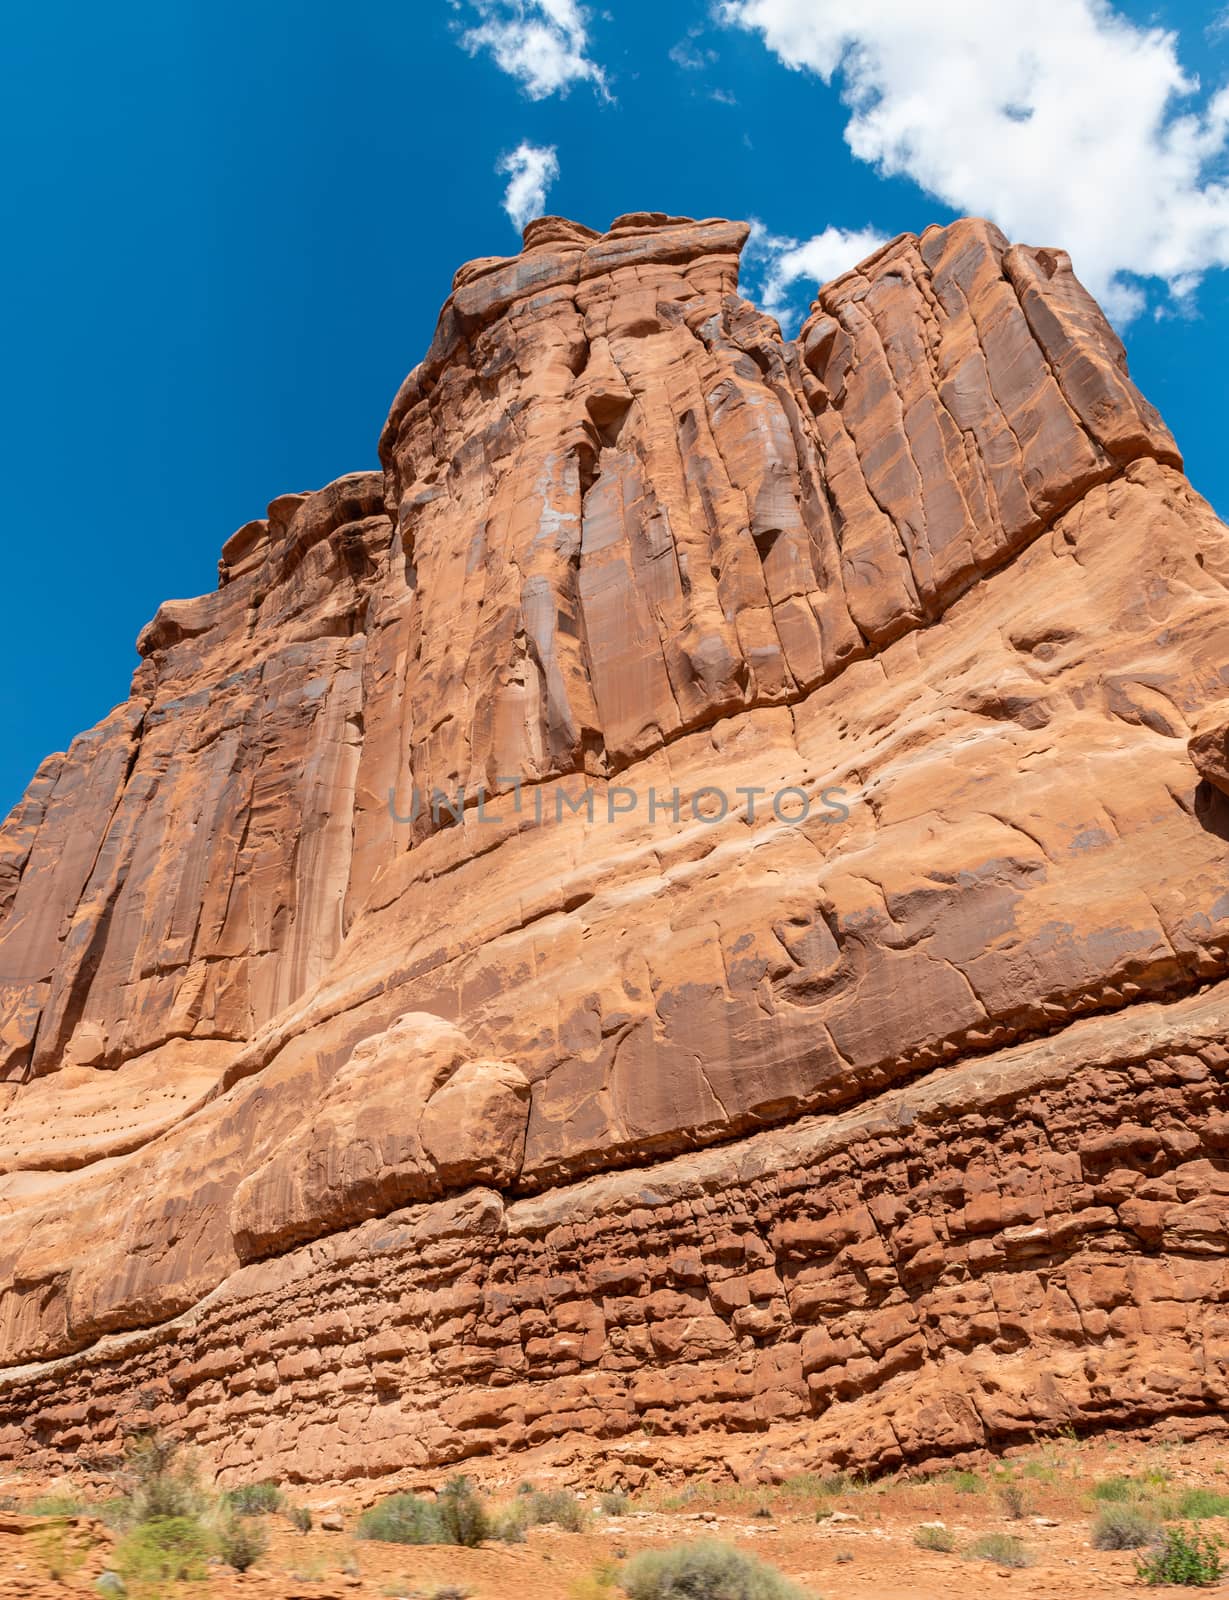 Sandstone formation in the entrance of Arches National Park, Utah by Njean